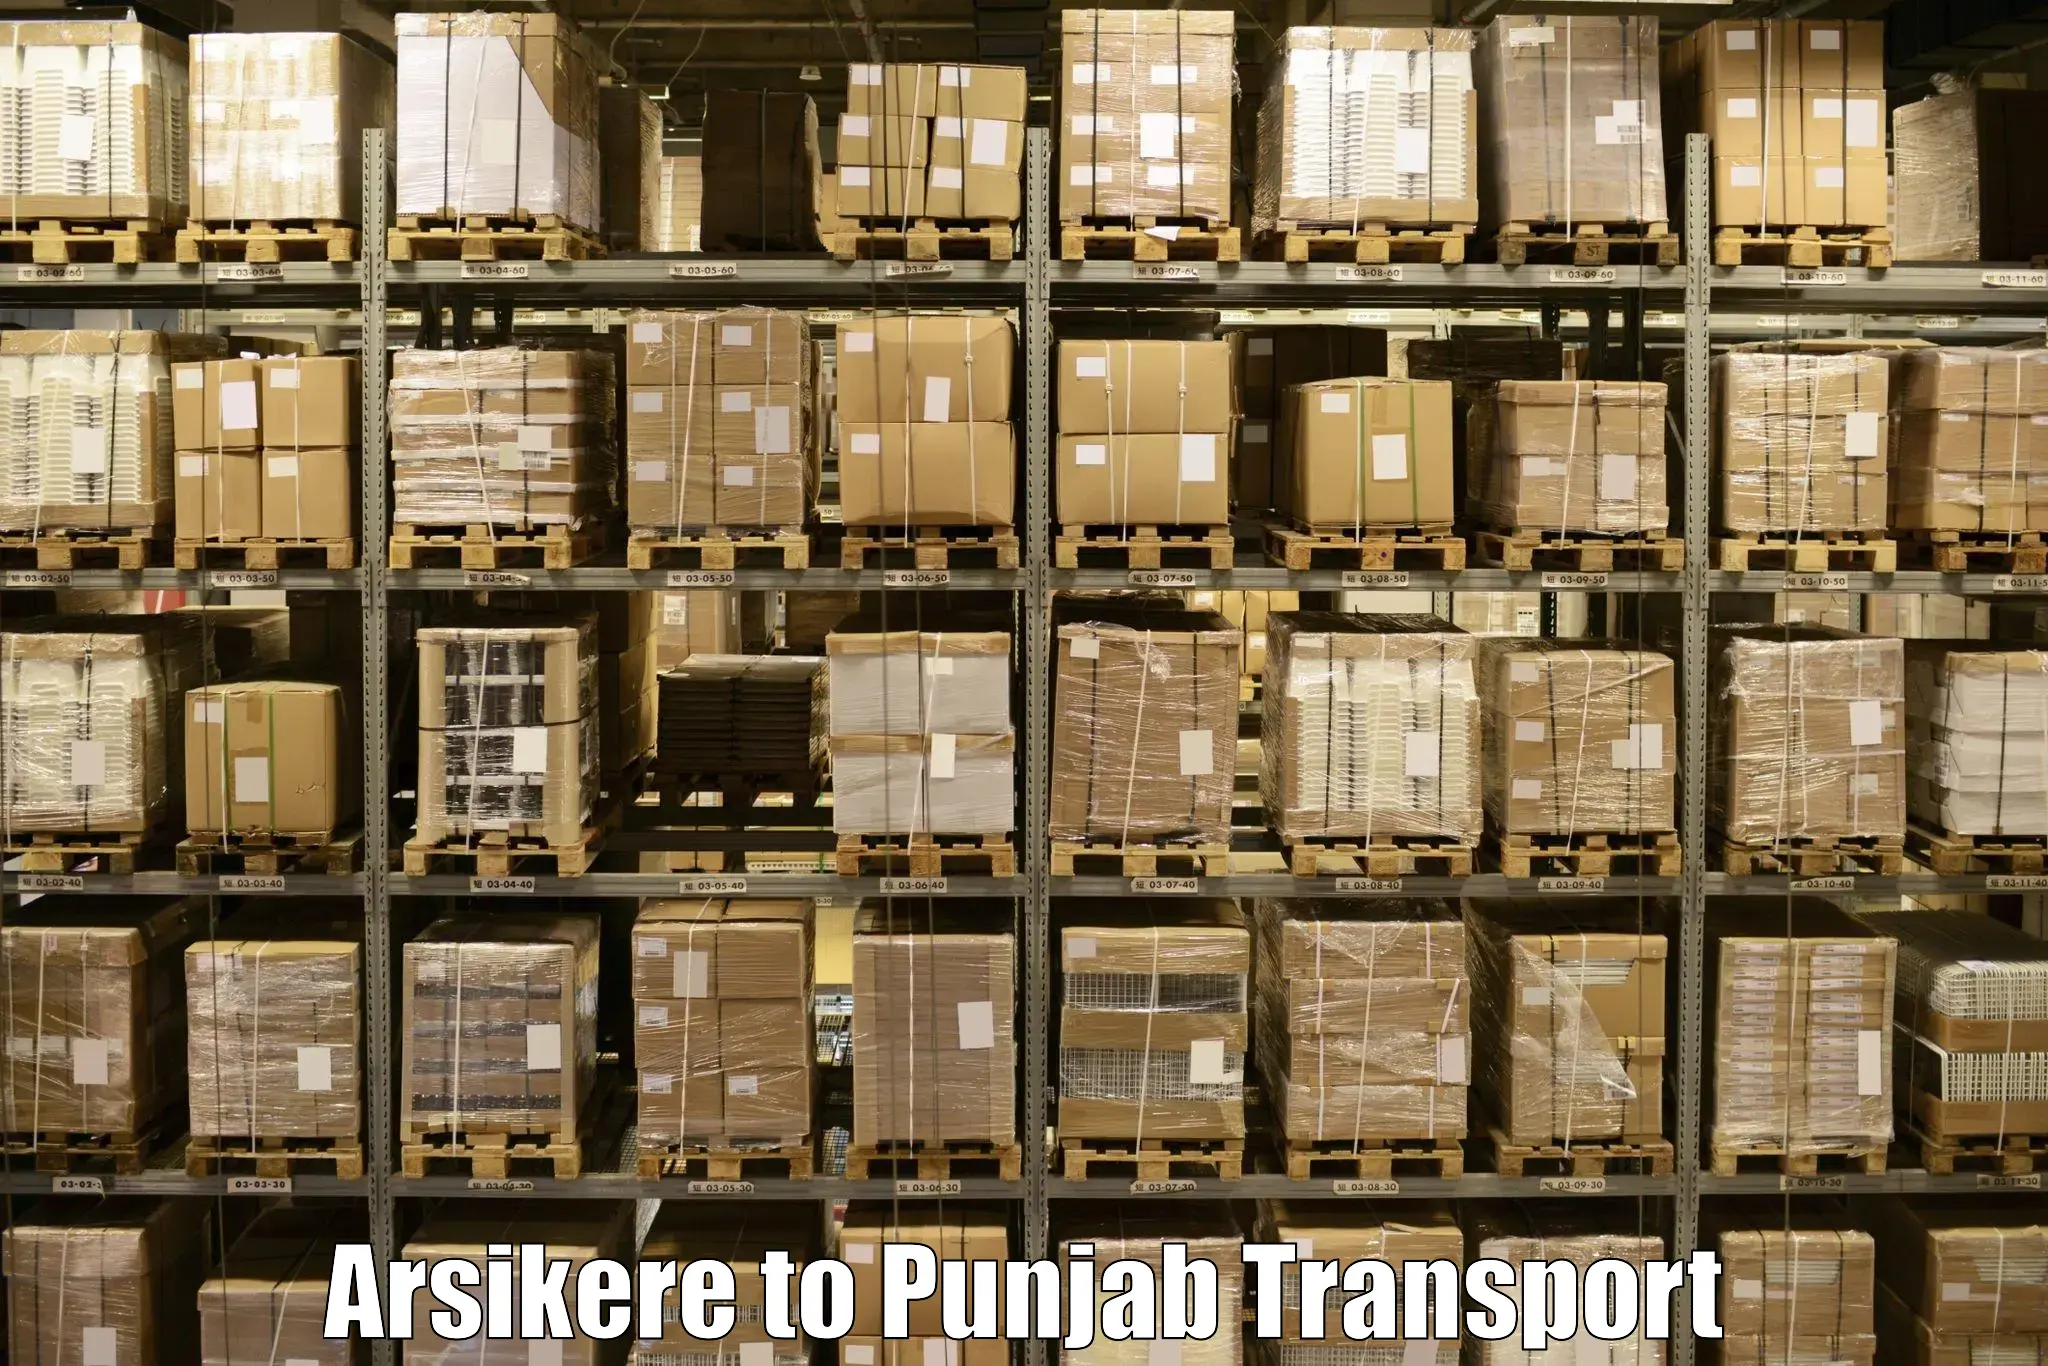 Daily parcel service transport Arsikere to Sunam